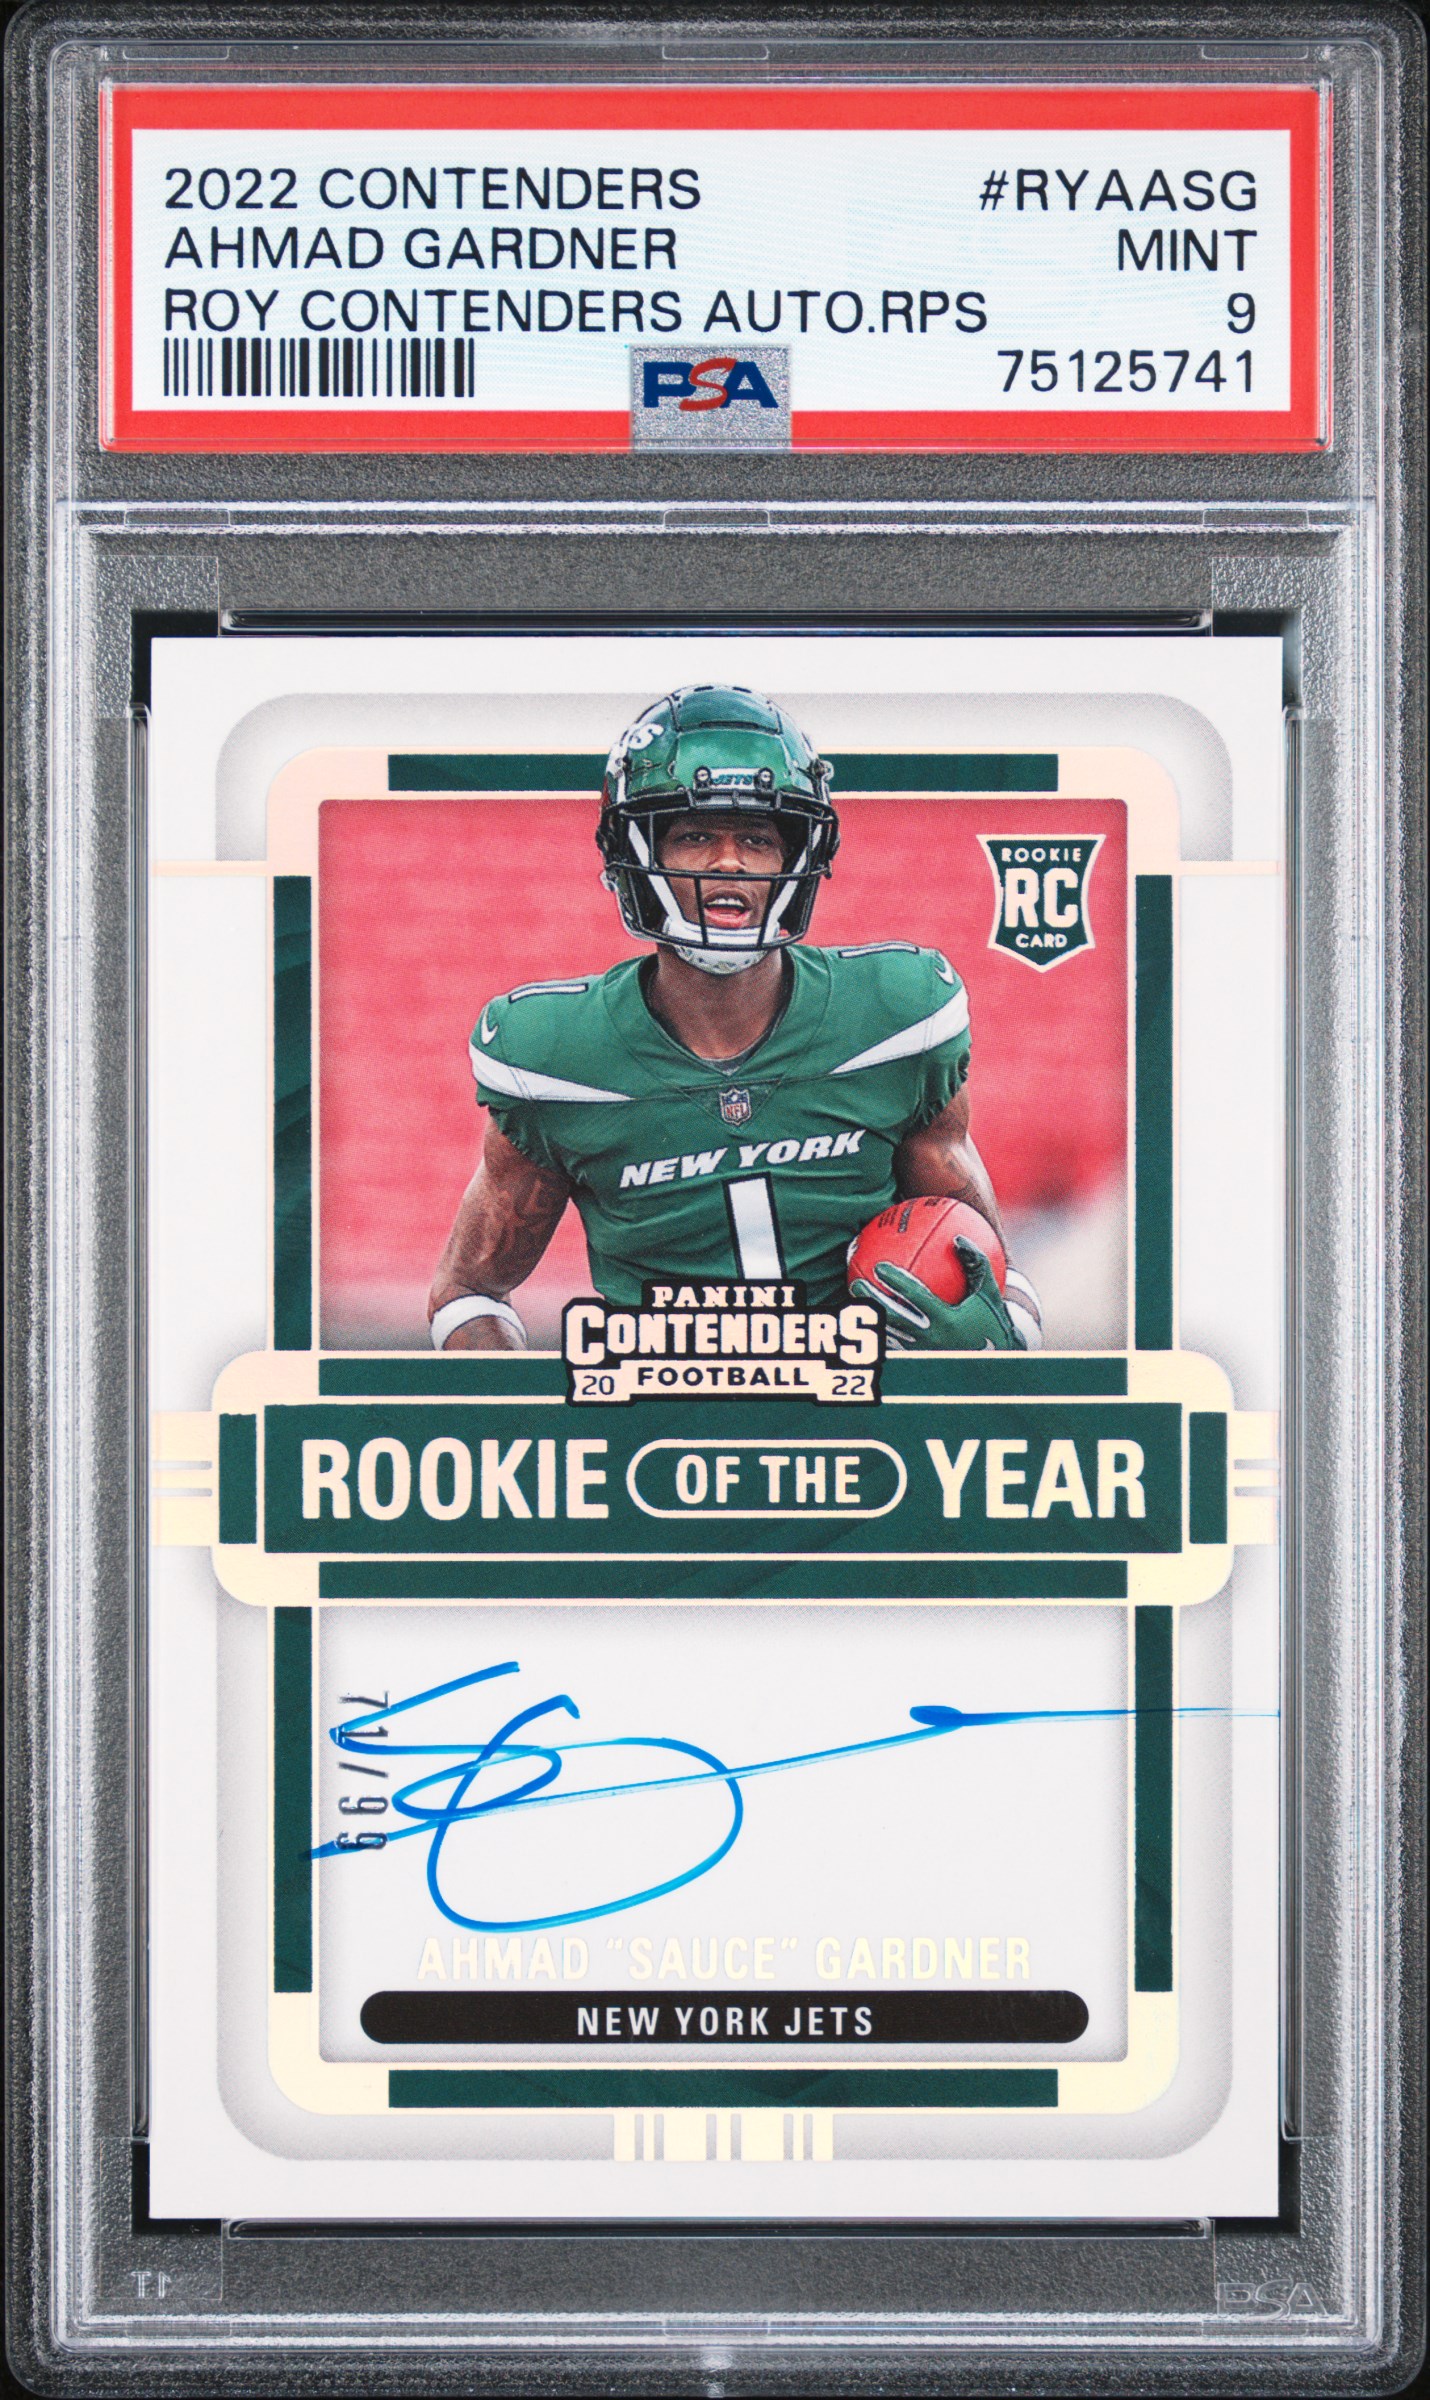 2022 Panini Contenders Rookie Of The Year Contenders Autographs RPS #RYA-ASG Ahmad “Sauce” Gardner Signed Rookie Card (#71/99) - PSA MINT 9